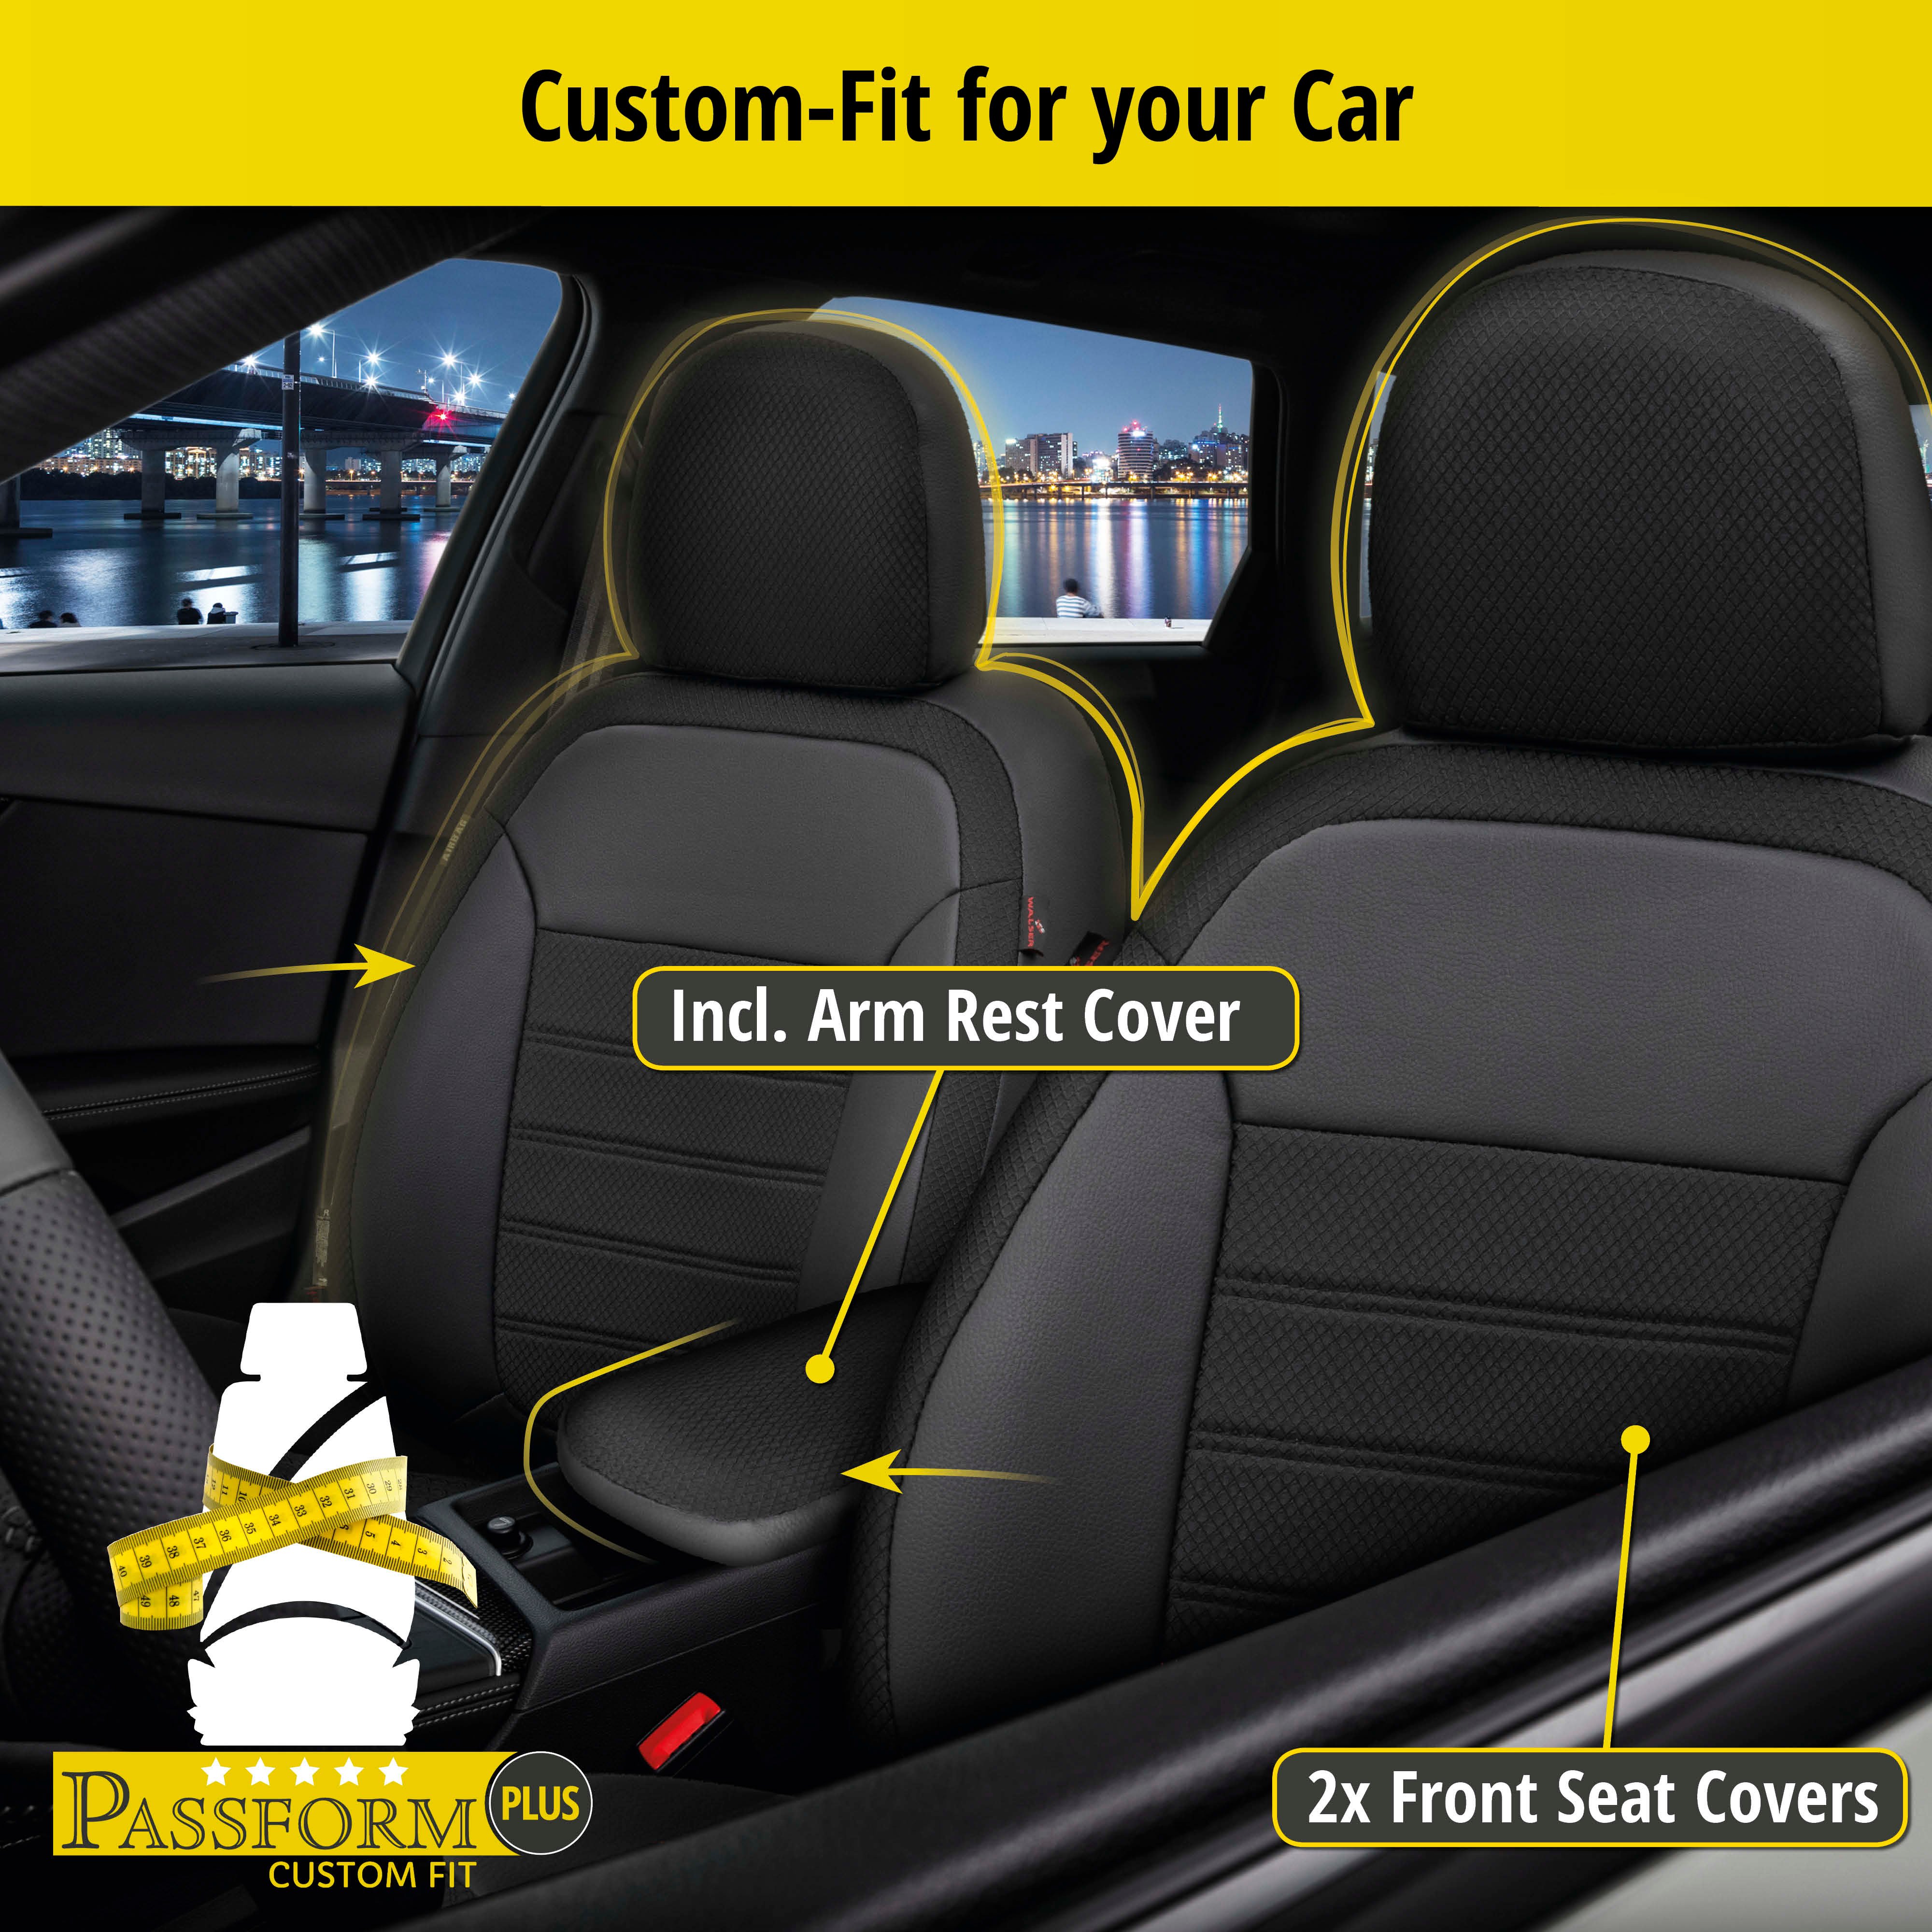 Seat Cover Aversa for Audi A3 2012-Today, 2 seat covers for normal seats